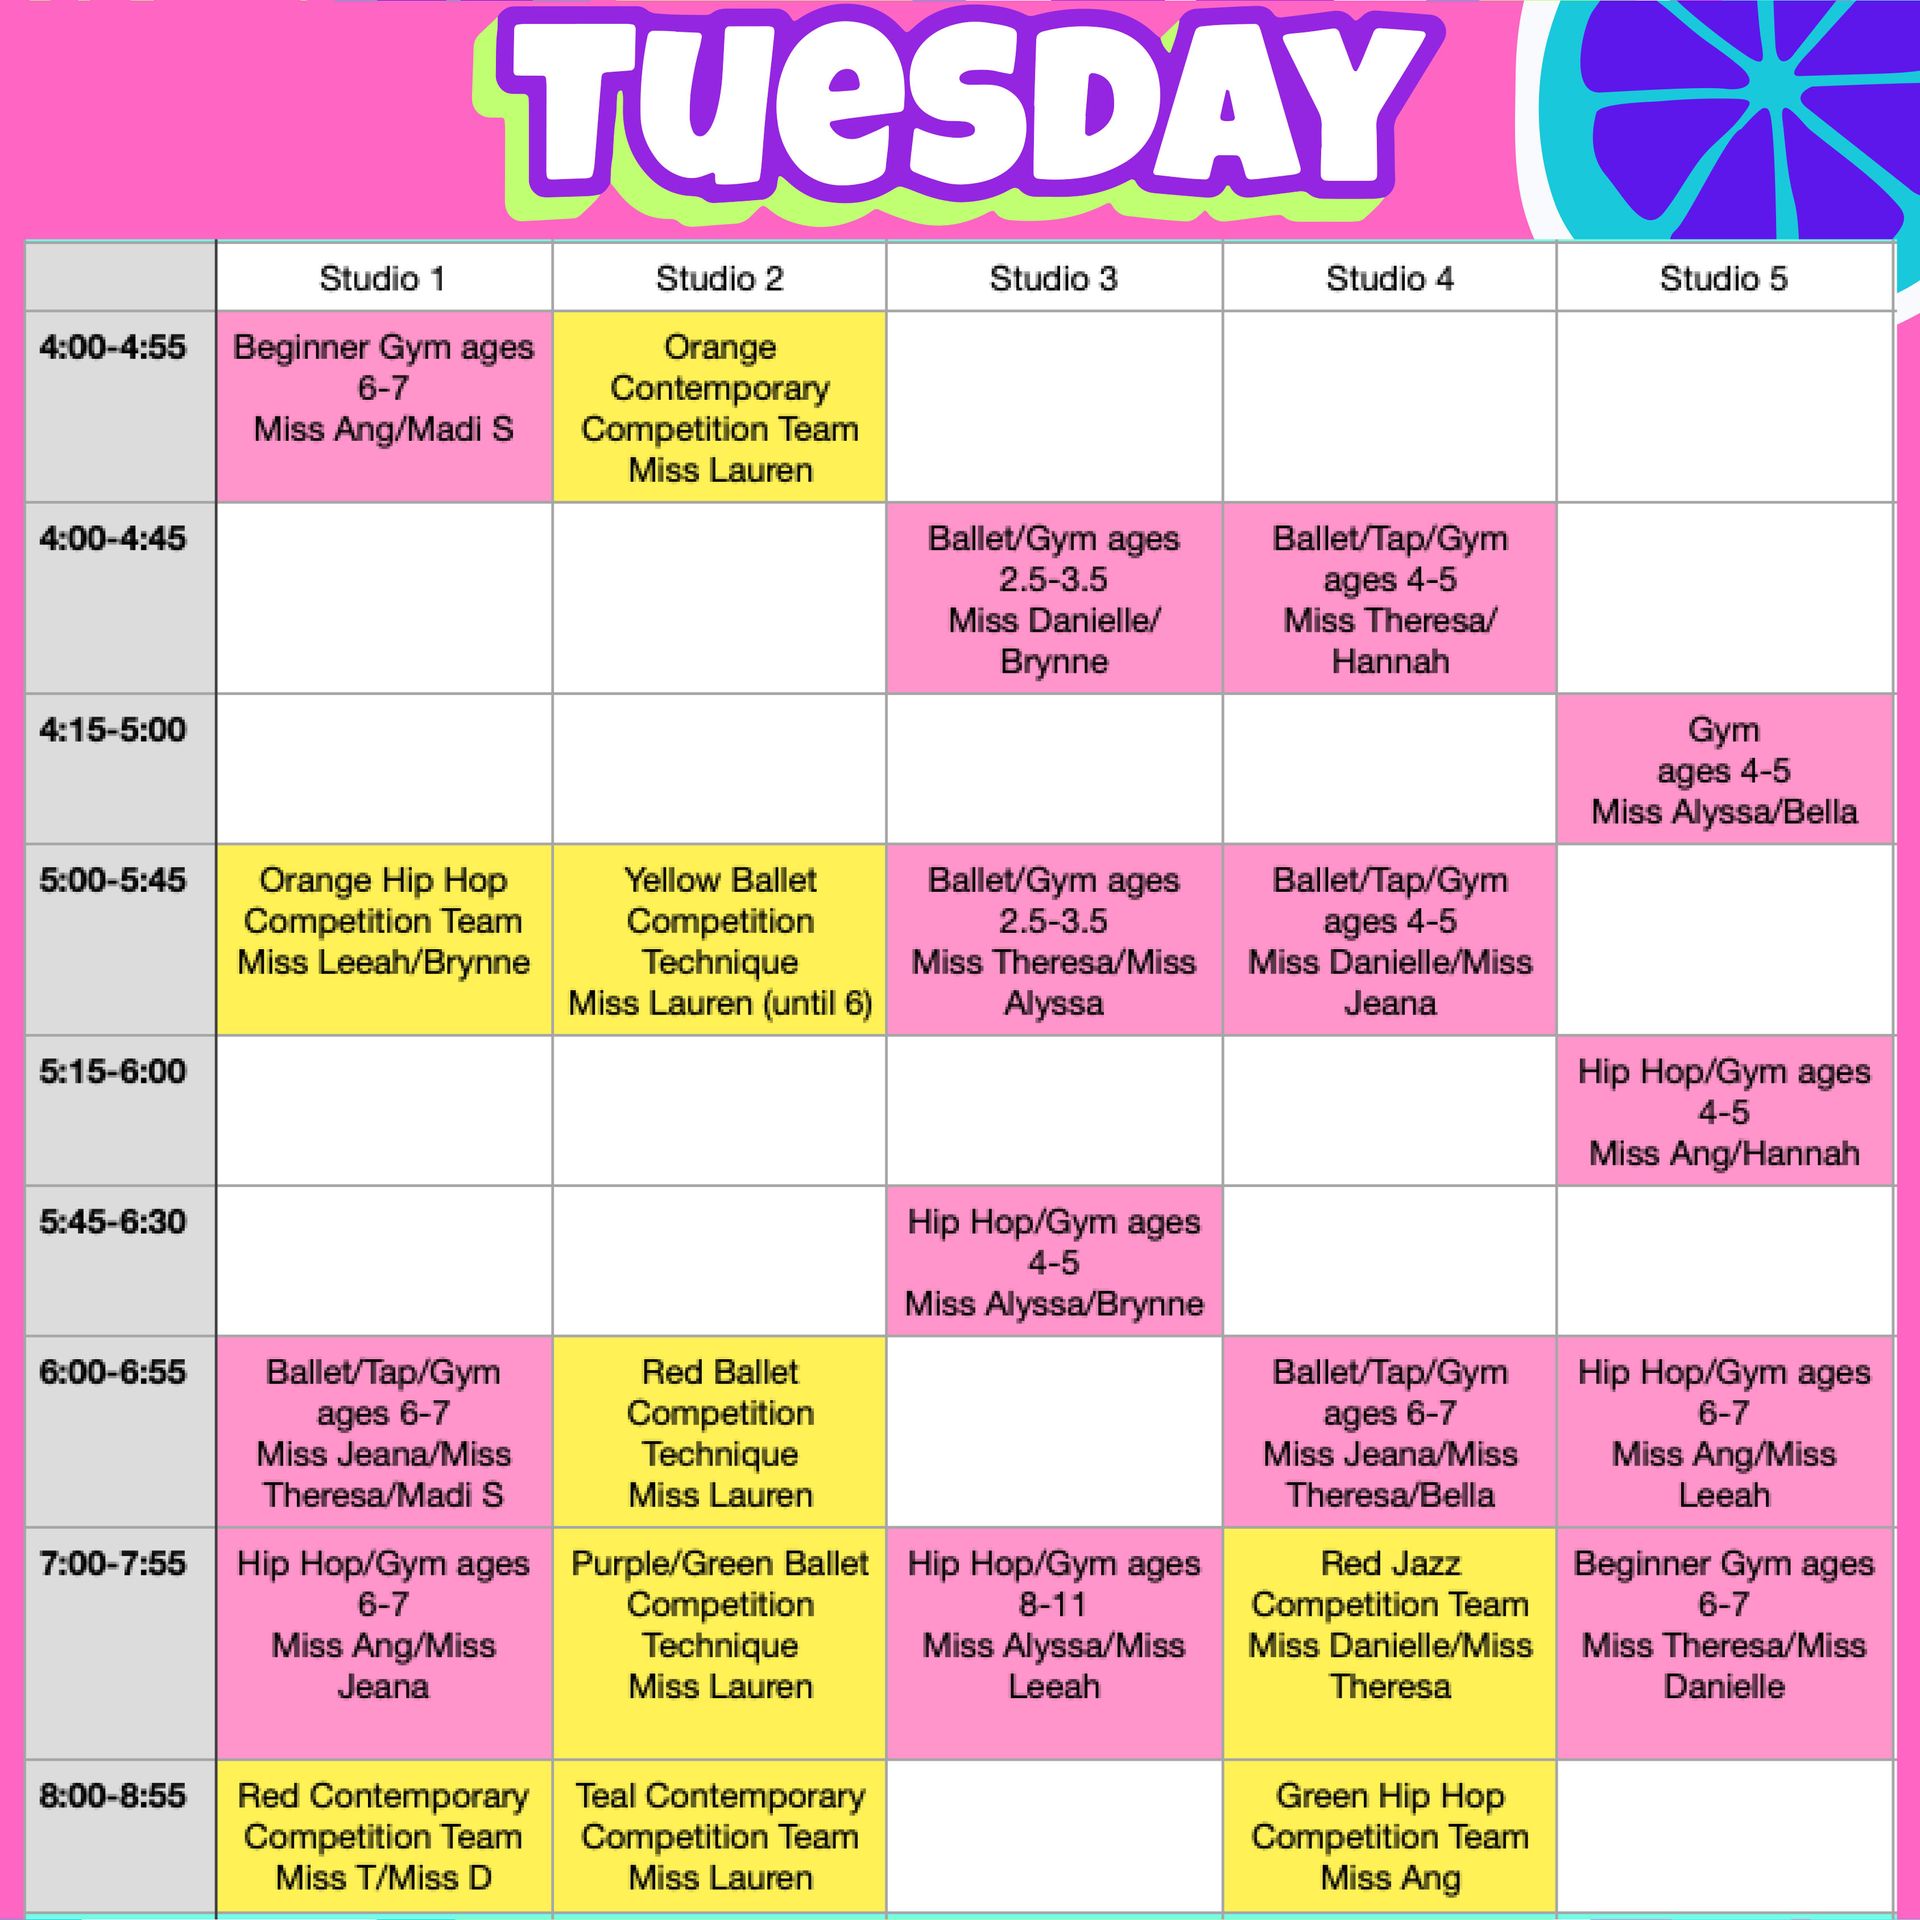 A Tuesday schedule for a dance studio